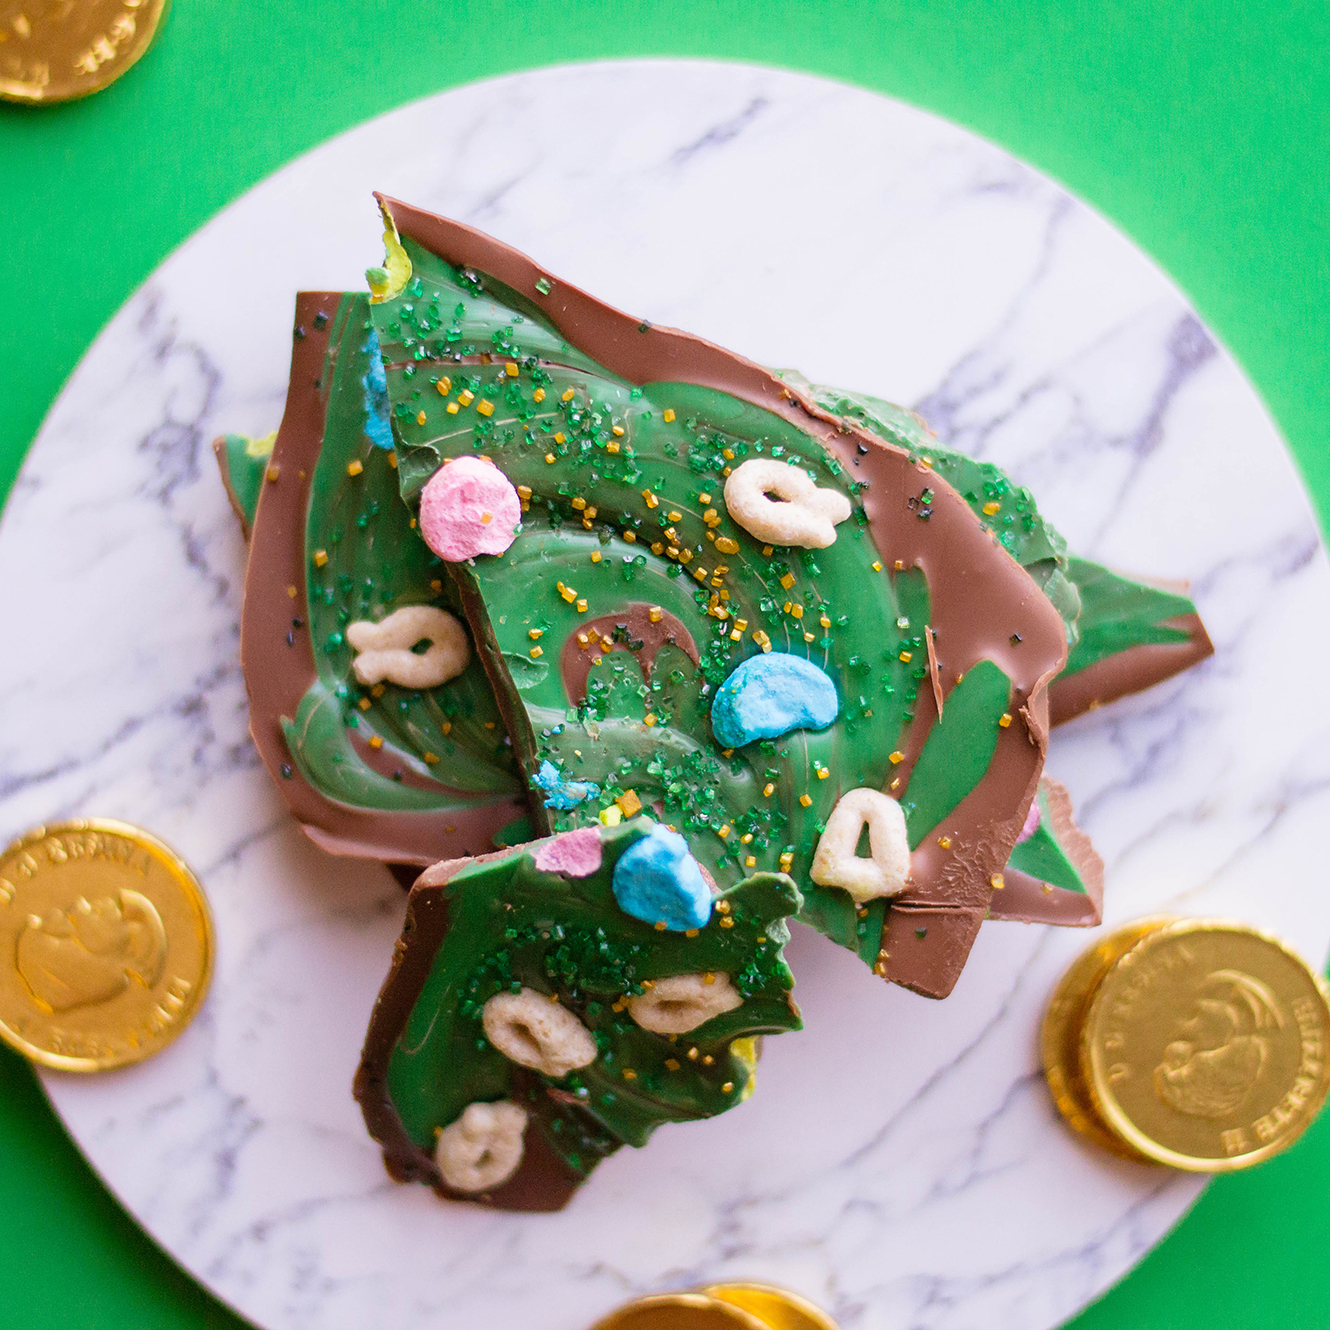 Quick! It's almost St. Patrick's Day! Do you have anything prepared? Our Lucky Chocolate Bark will have you feeling festive and prepared for the upcoming festivities.